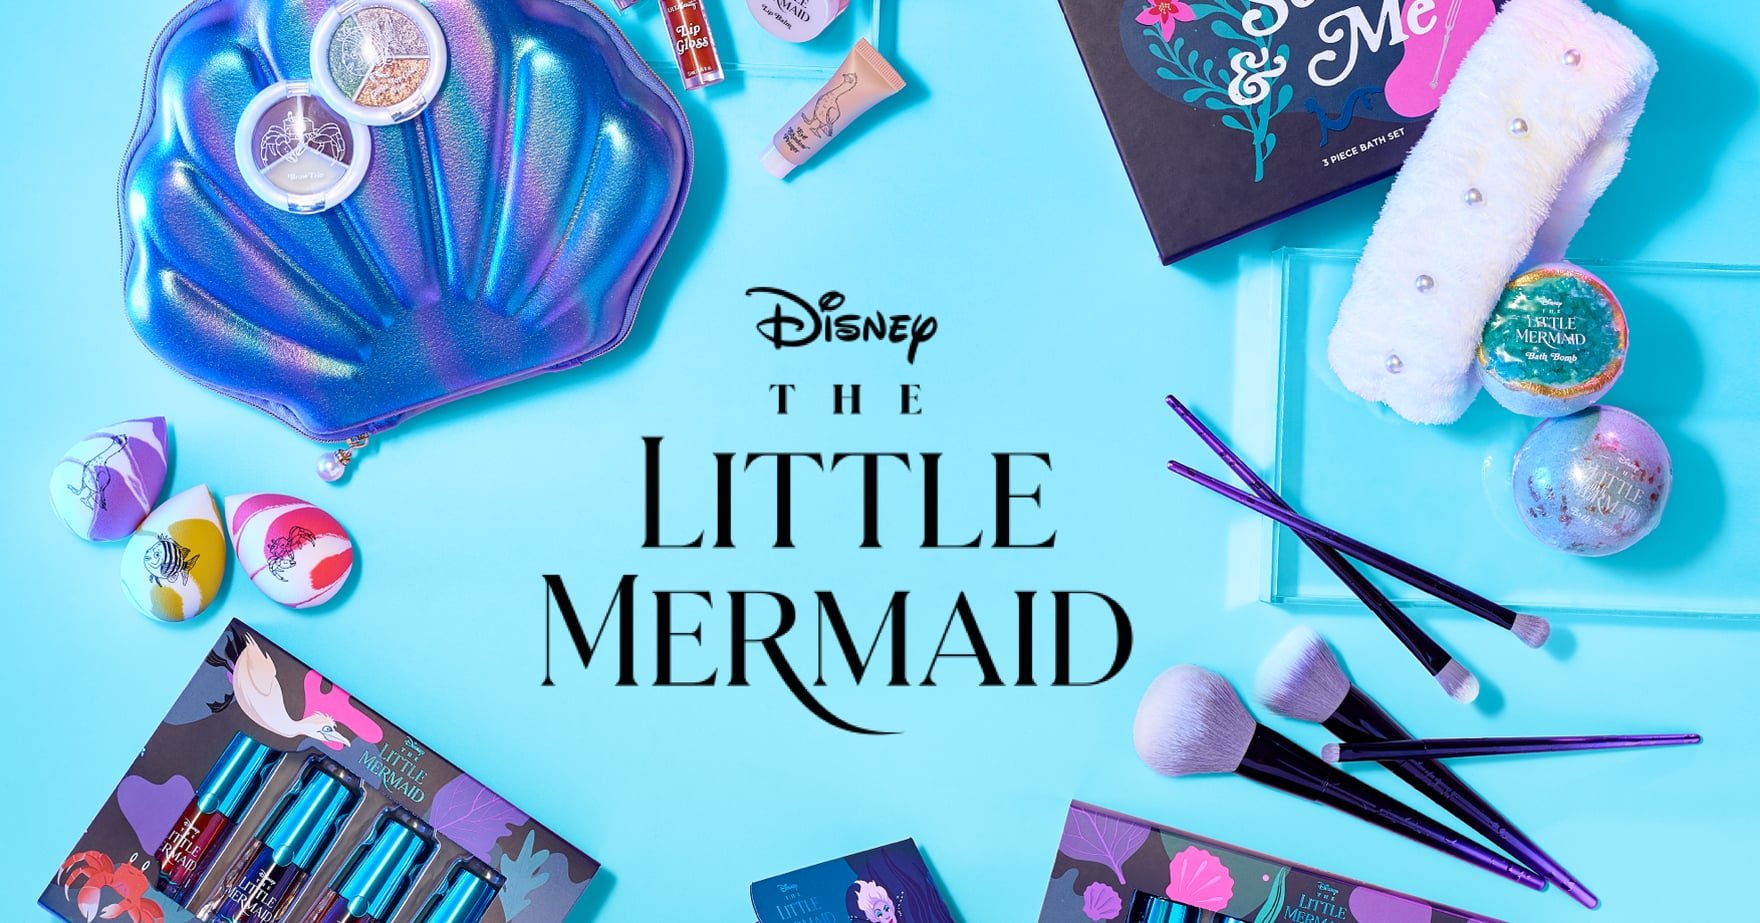 Get Your "The Little Mermaid" Fix With Ulta's New Disney Collaboration